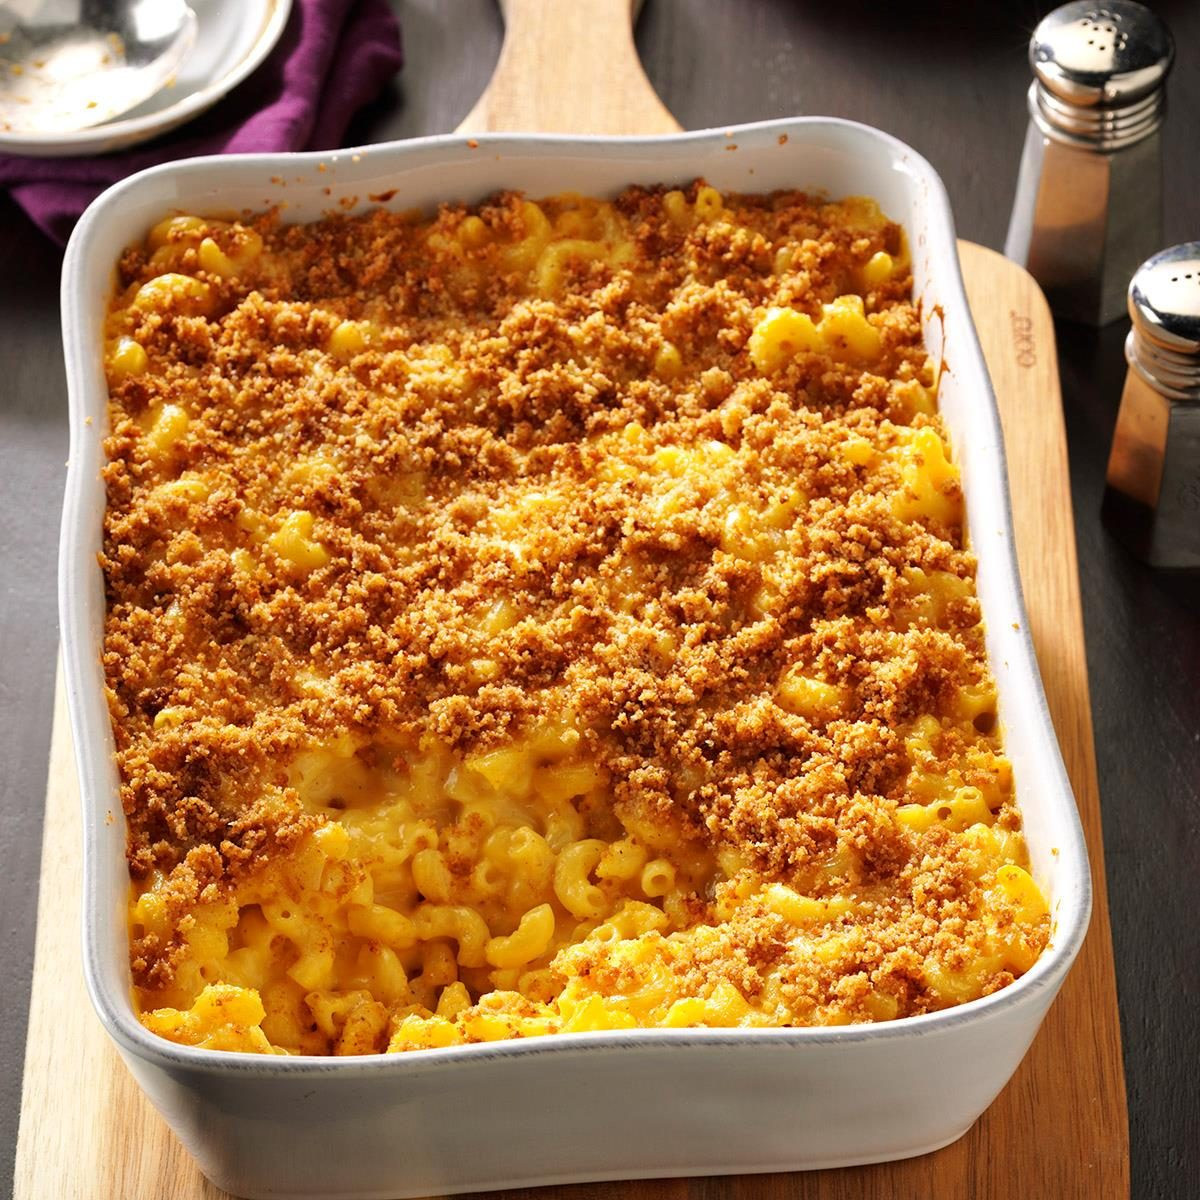 Recipe For Homemade Baked Macaroni And Cheese
 Baked Mac and Cheese Recipe